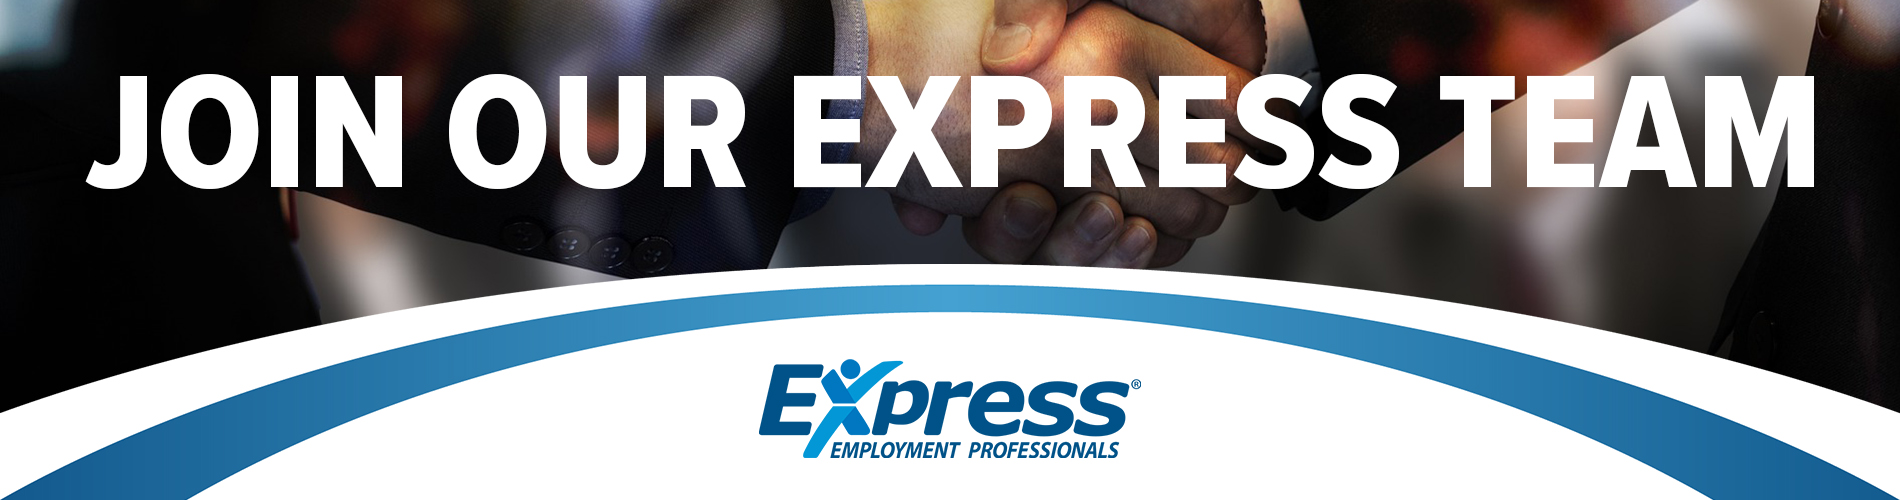 Join Our Express Team, Staffing Industry Jobs in Salem, OR